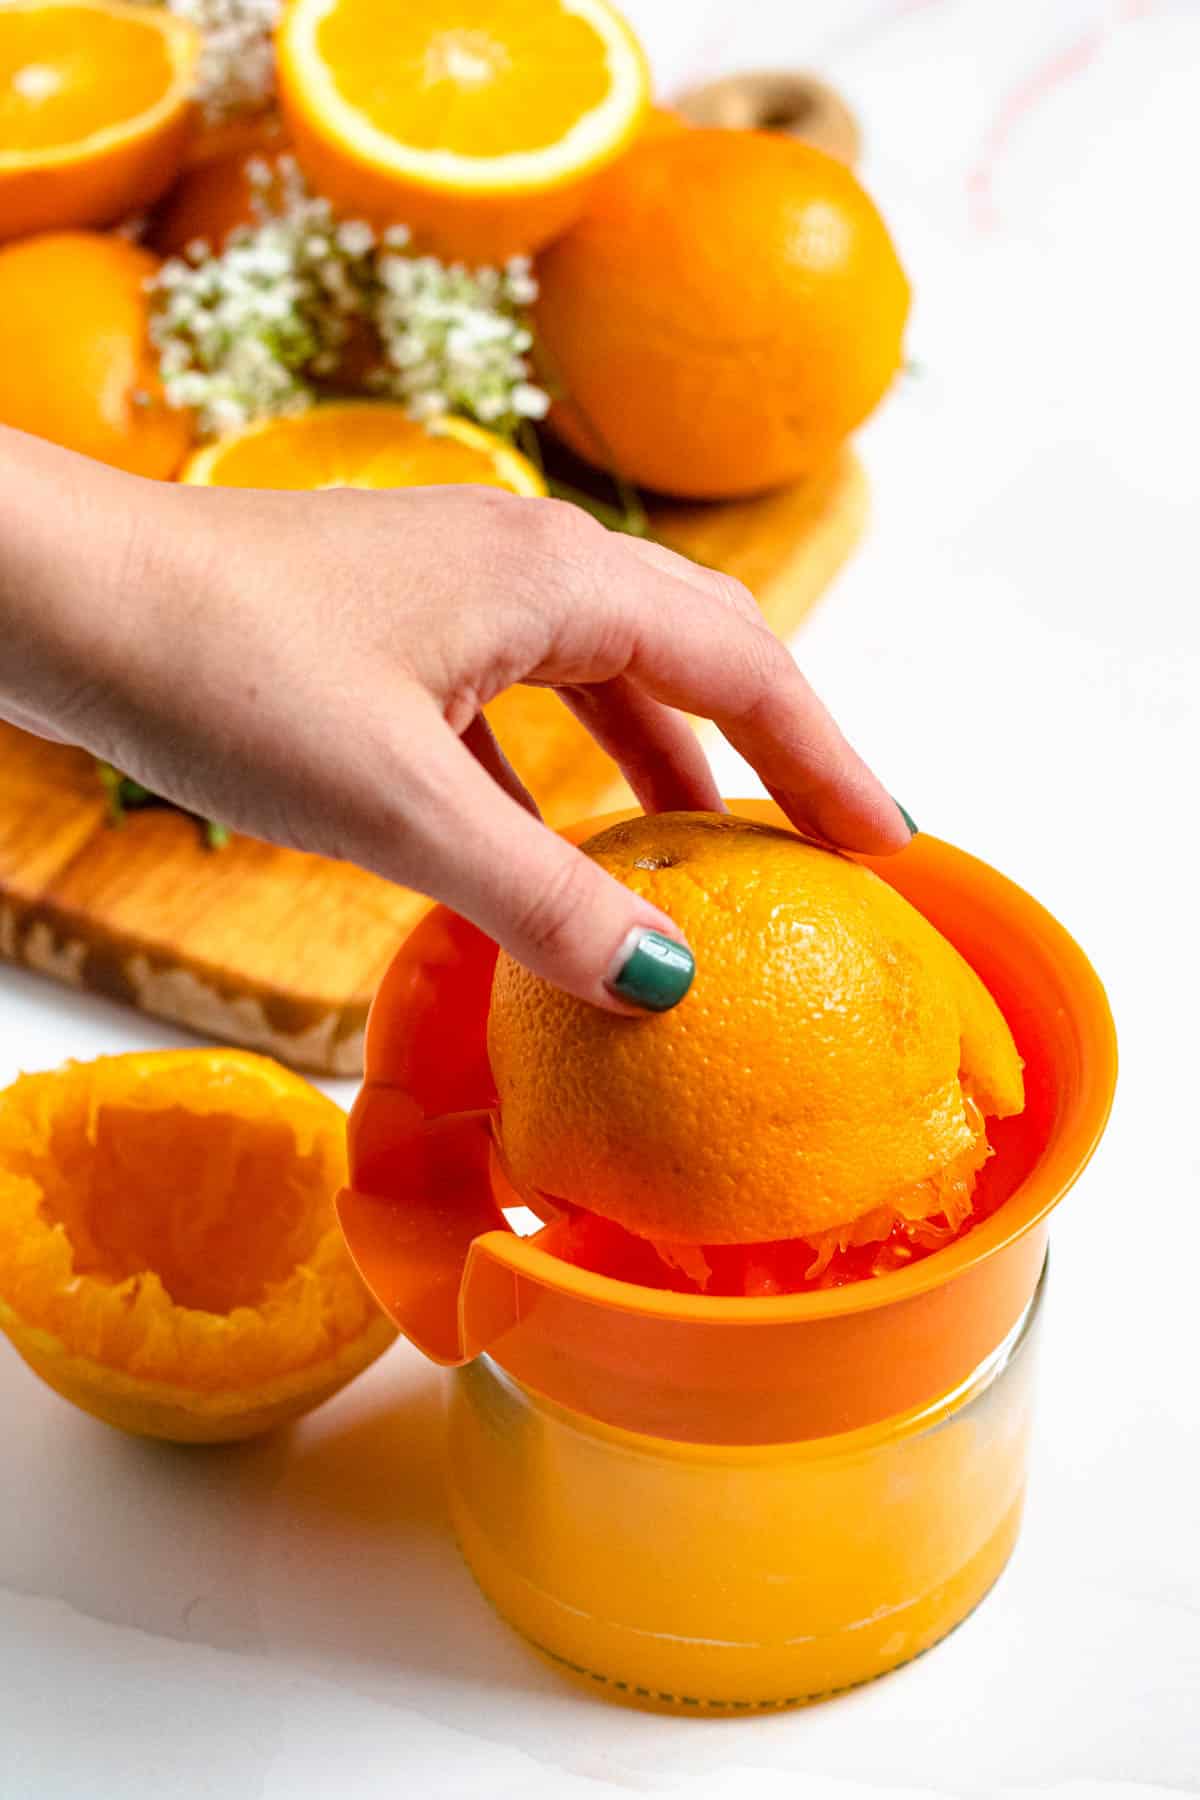 orange being juiced into a glass juicer with a white background